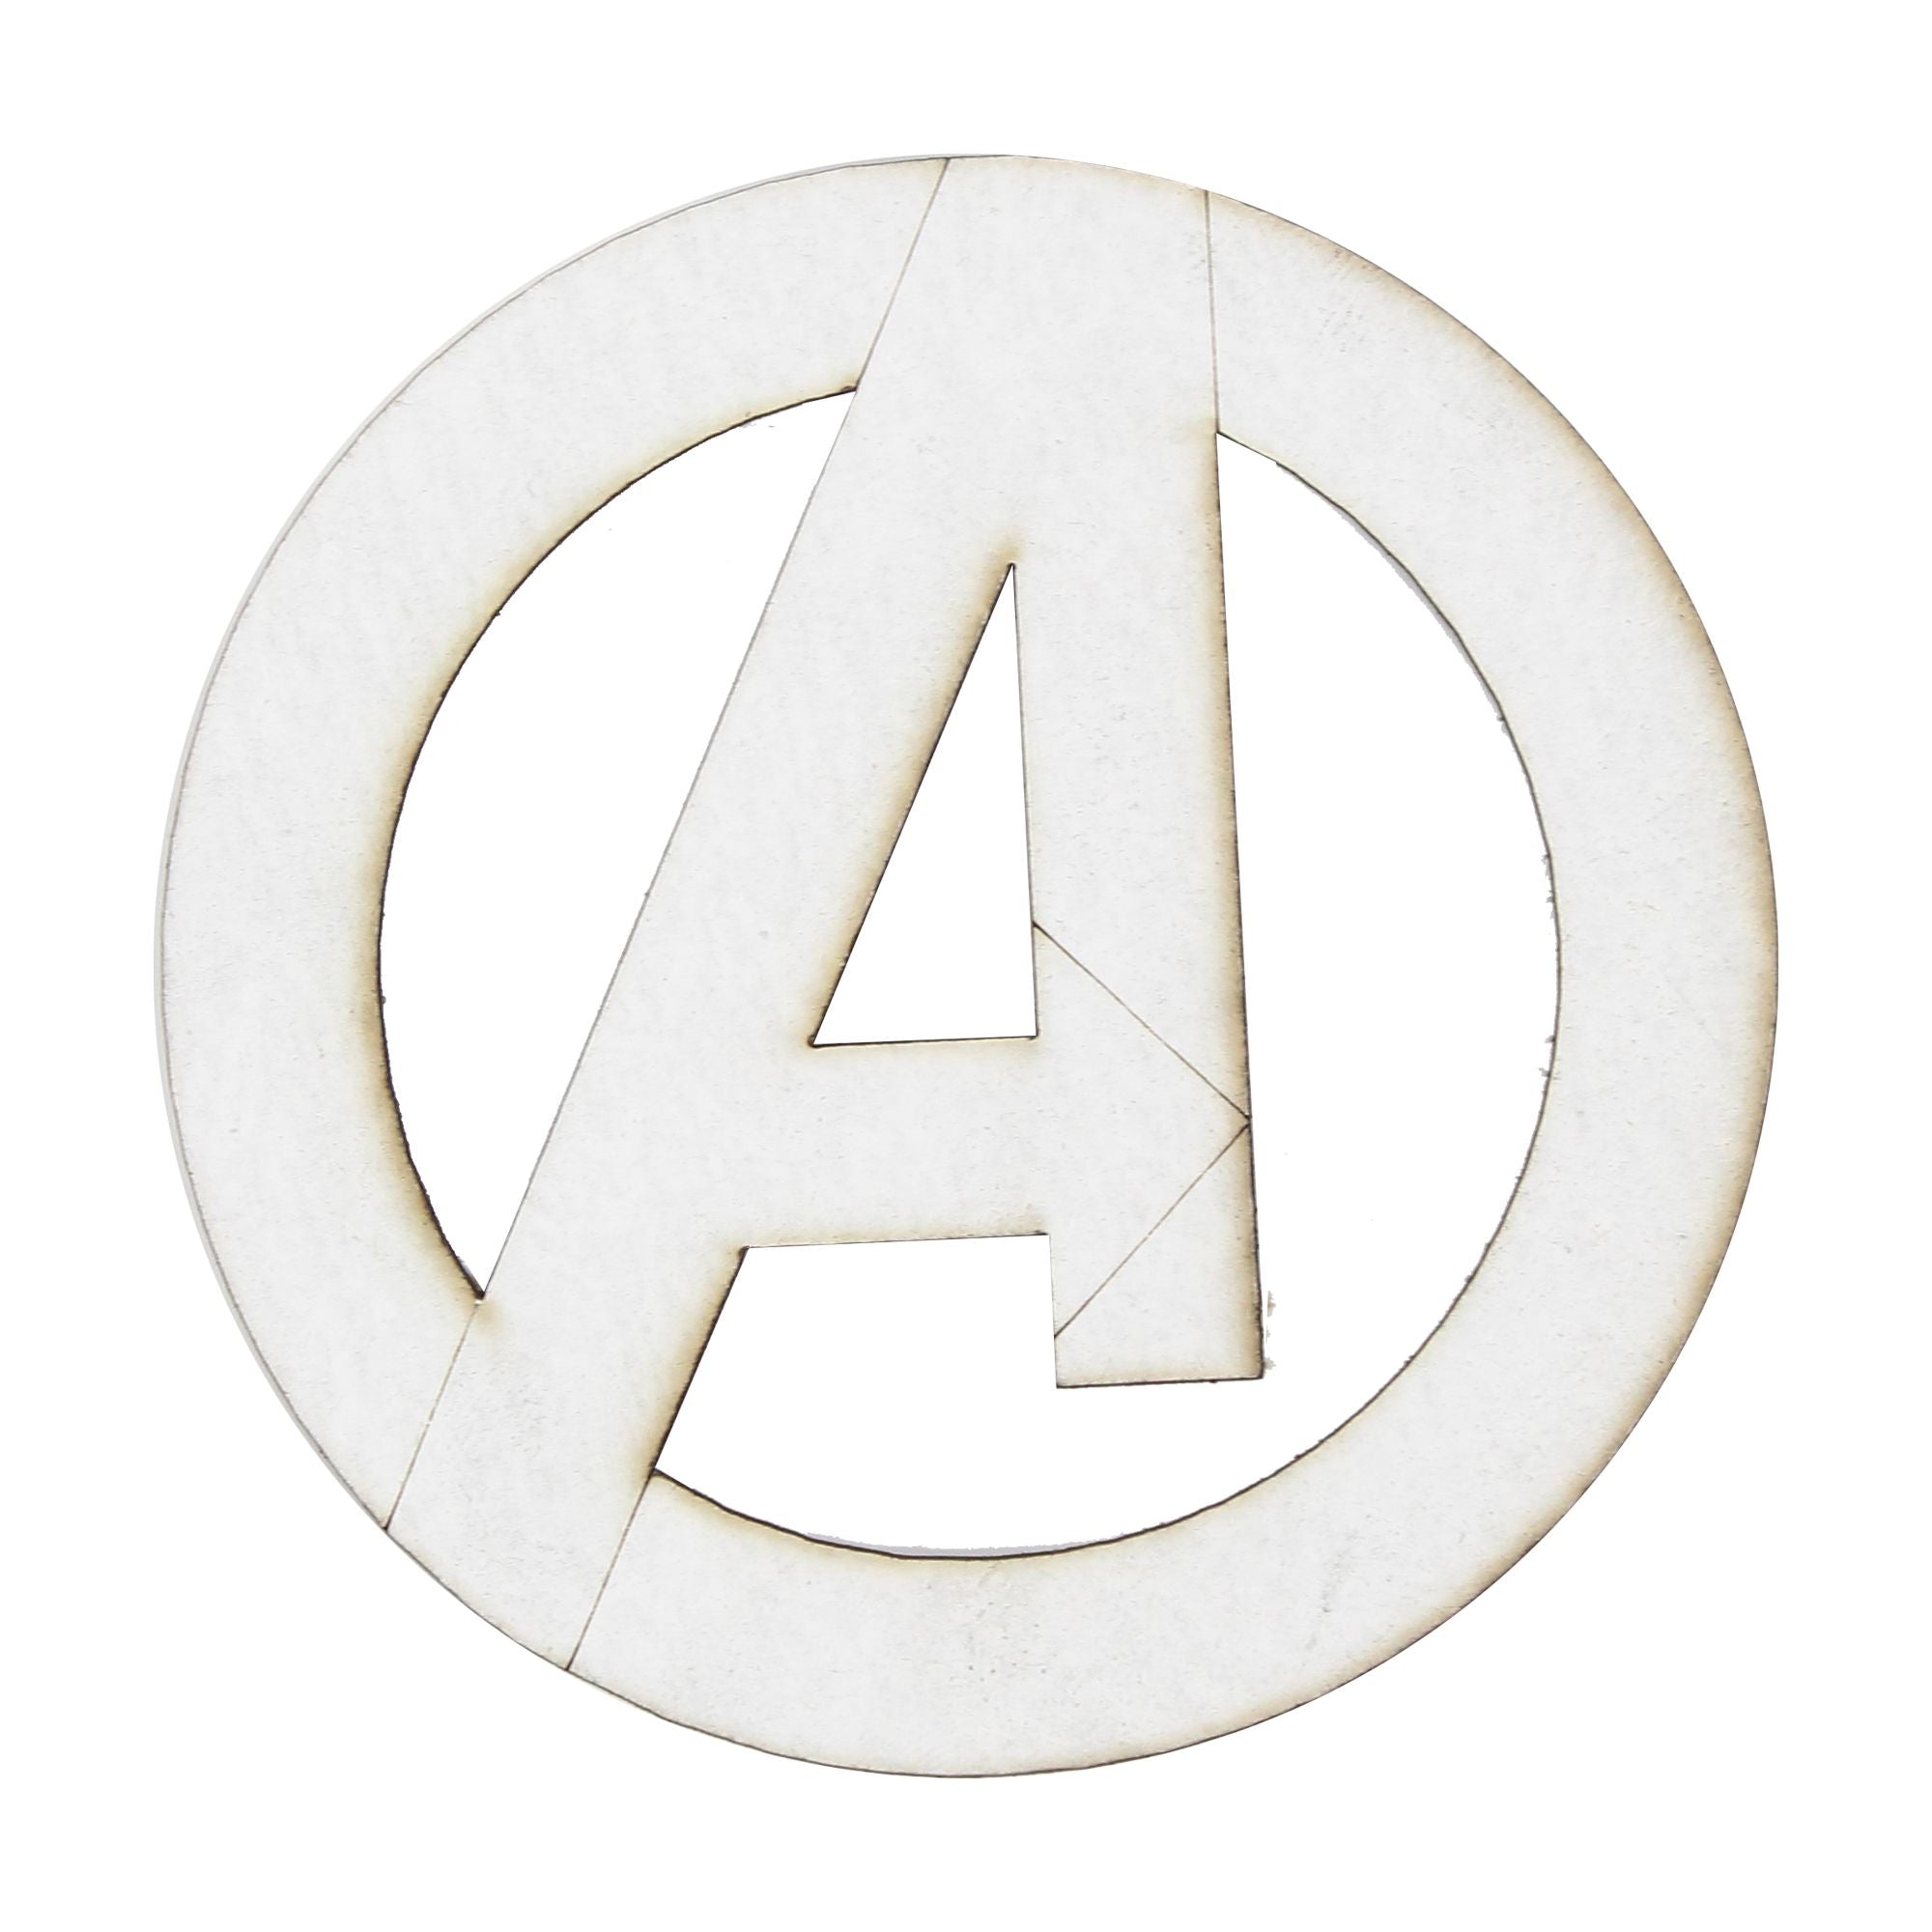 Primed Chipboard 1.5mm - Avengers Circle, Approx 3.85 x 0.7inch, 1Pc